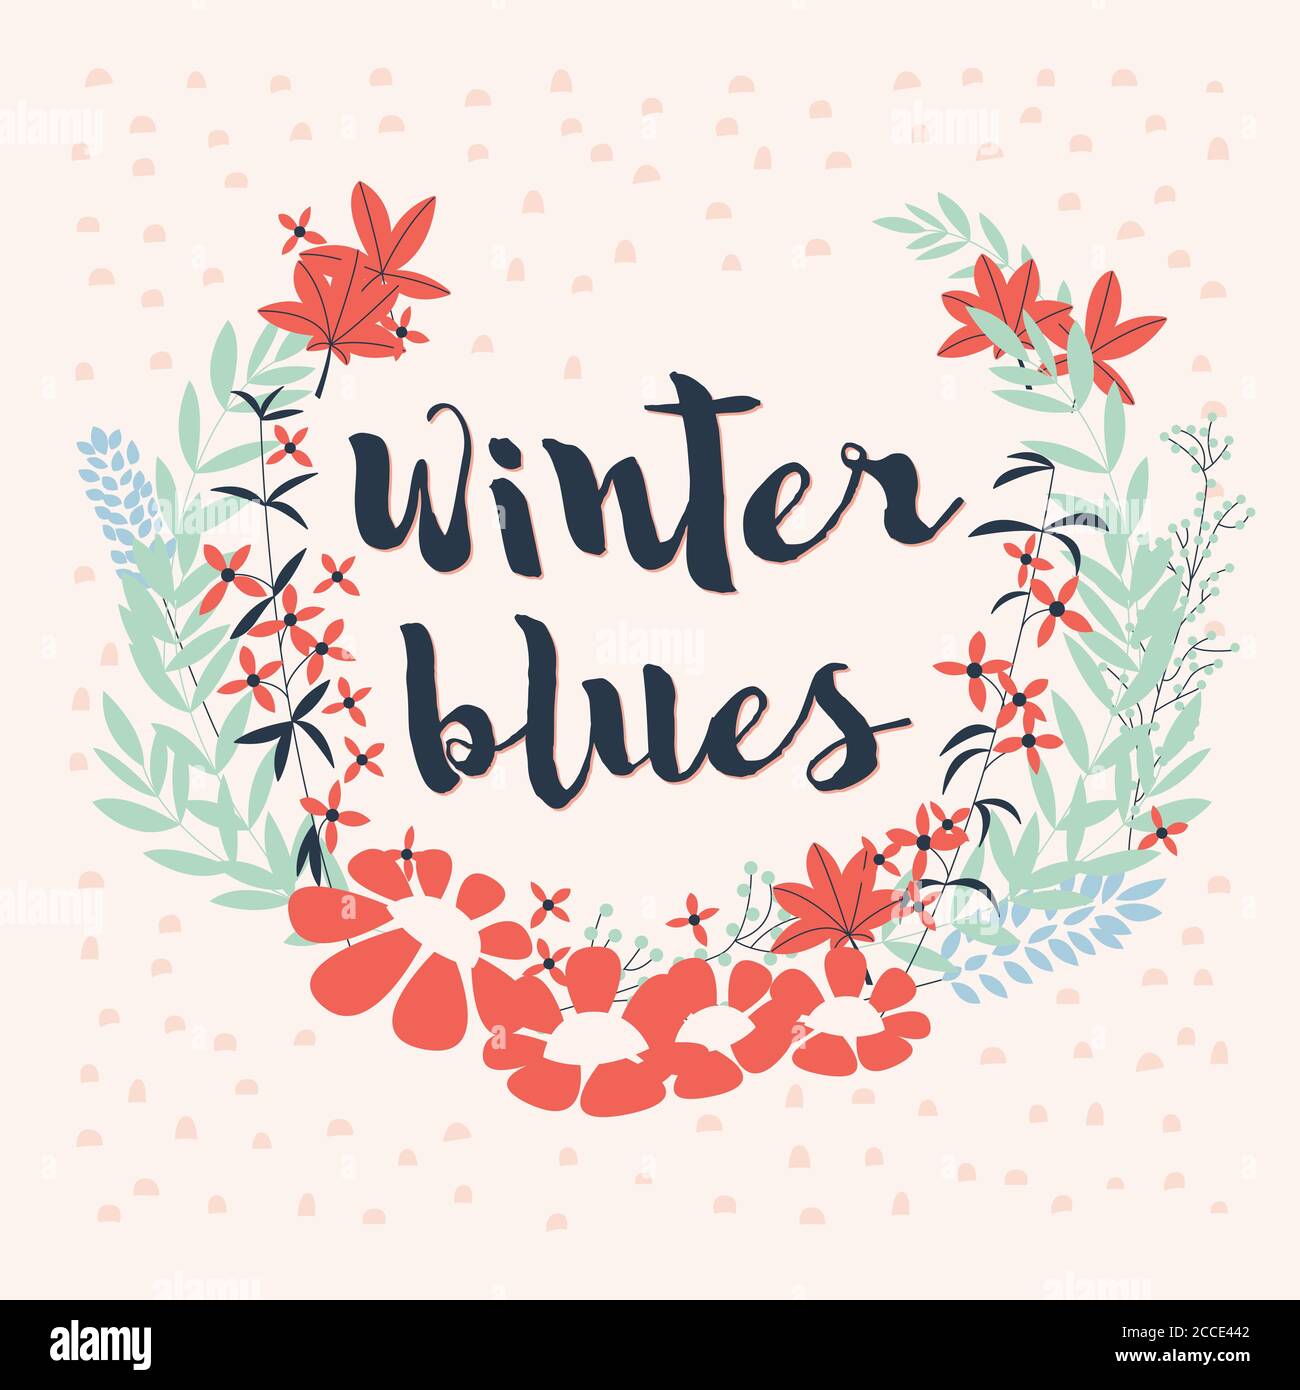 Colorful collection of winter floral arrangement and flowers for invitation, wedding or greeting cards, vector illustration Stock Vector